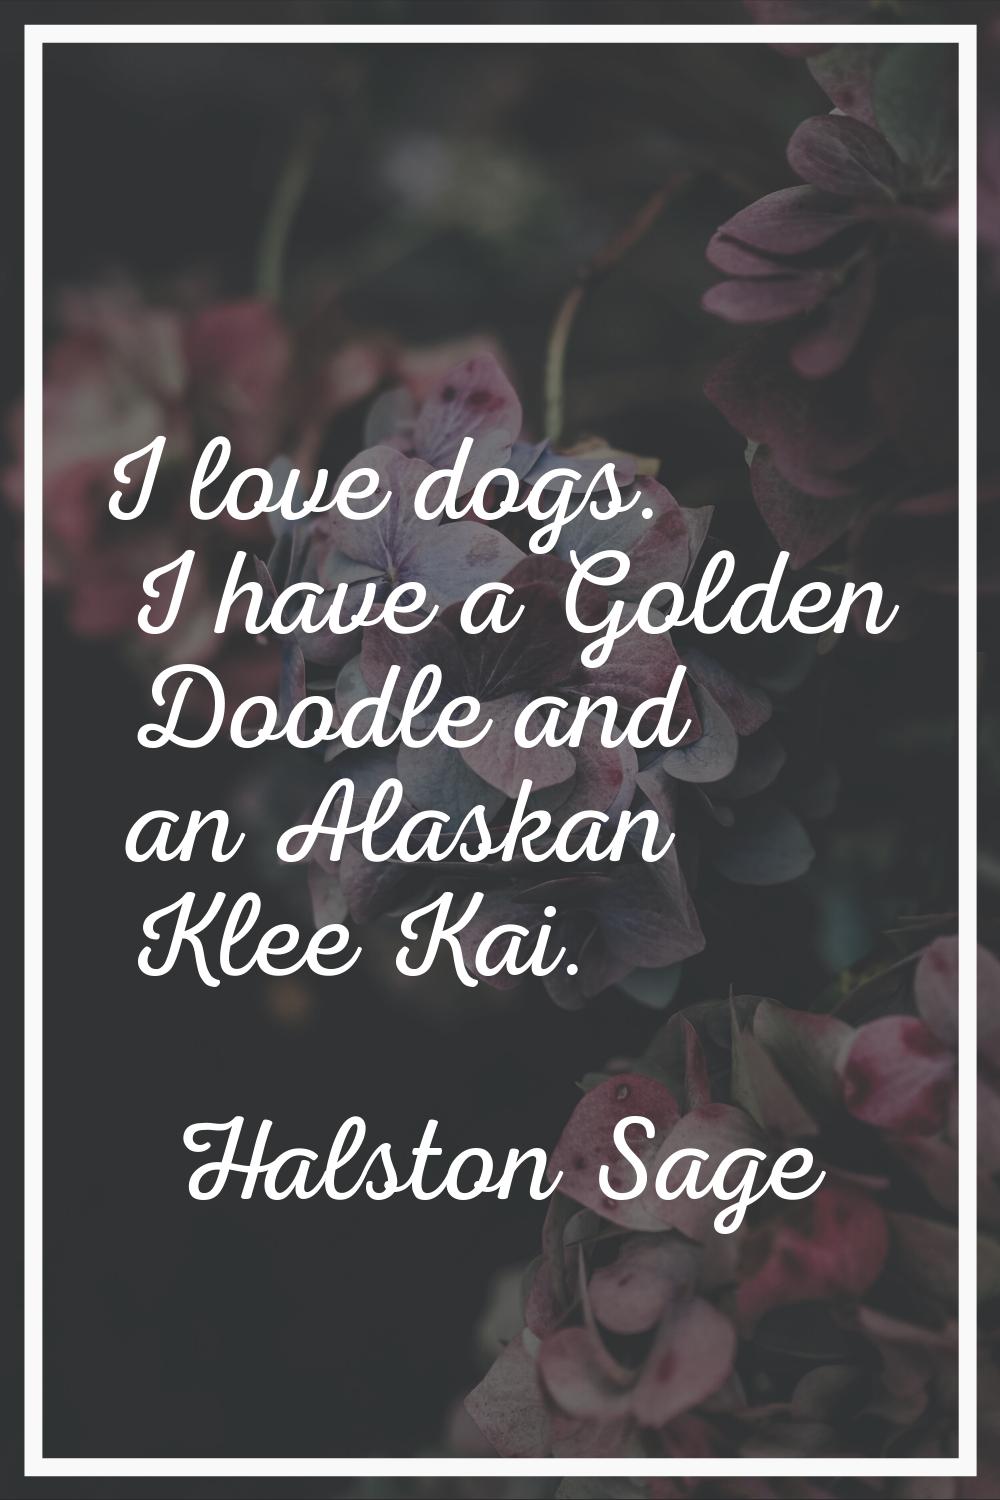 I love dogs. I have a Golden Doodle and an Alaskan Klee Kai.